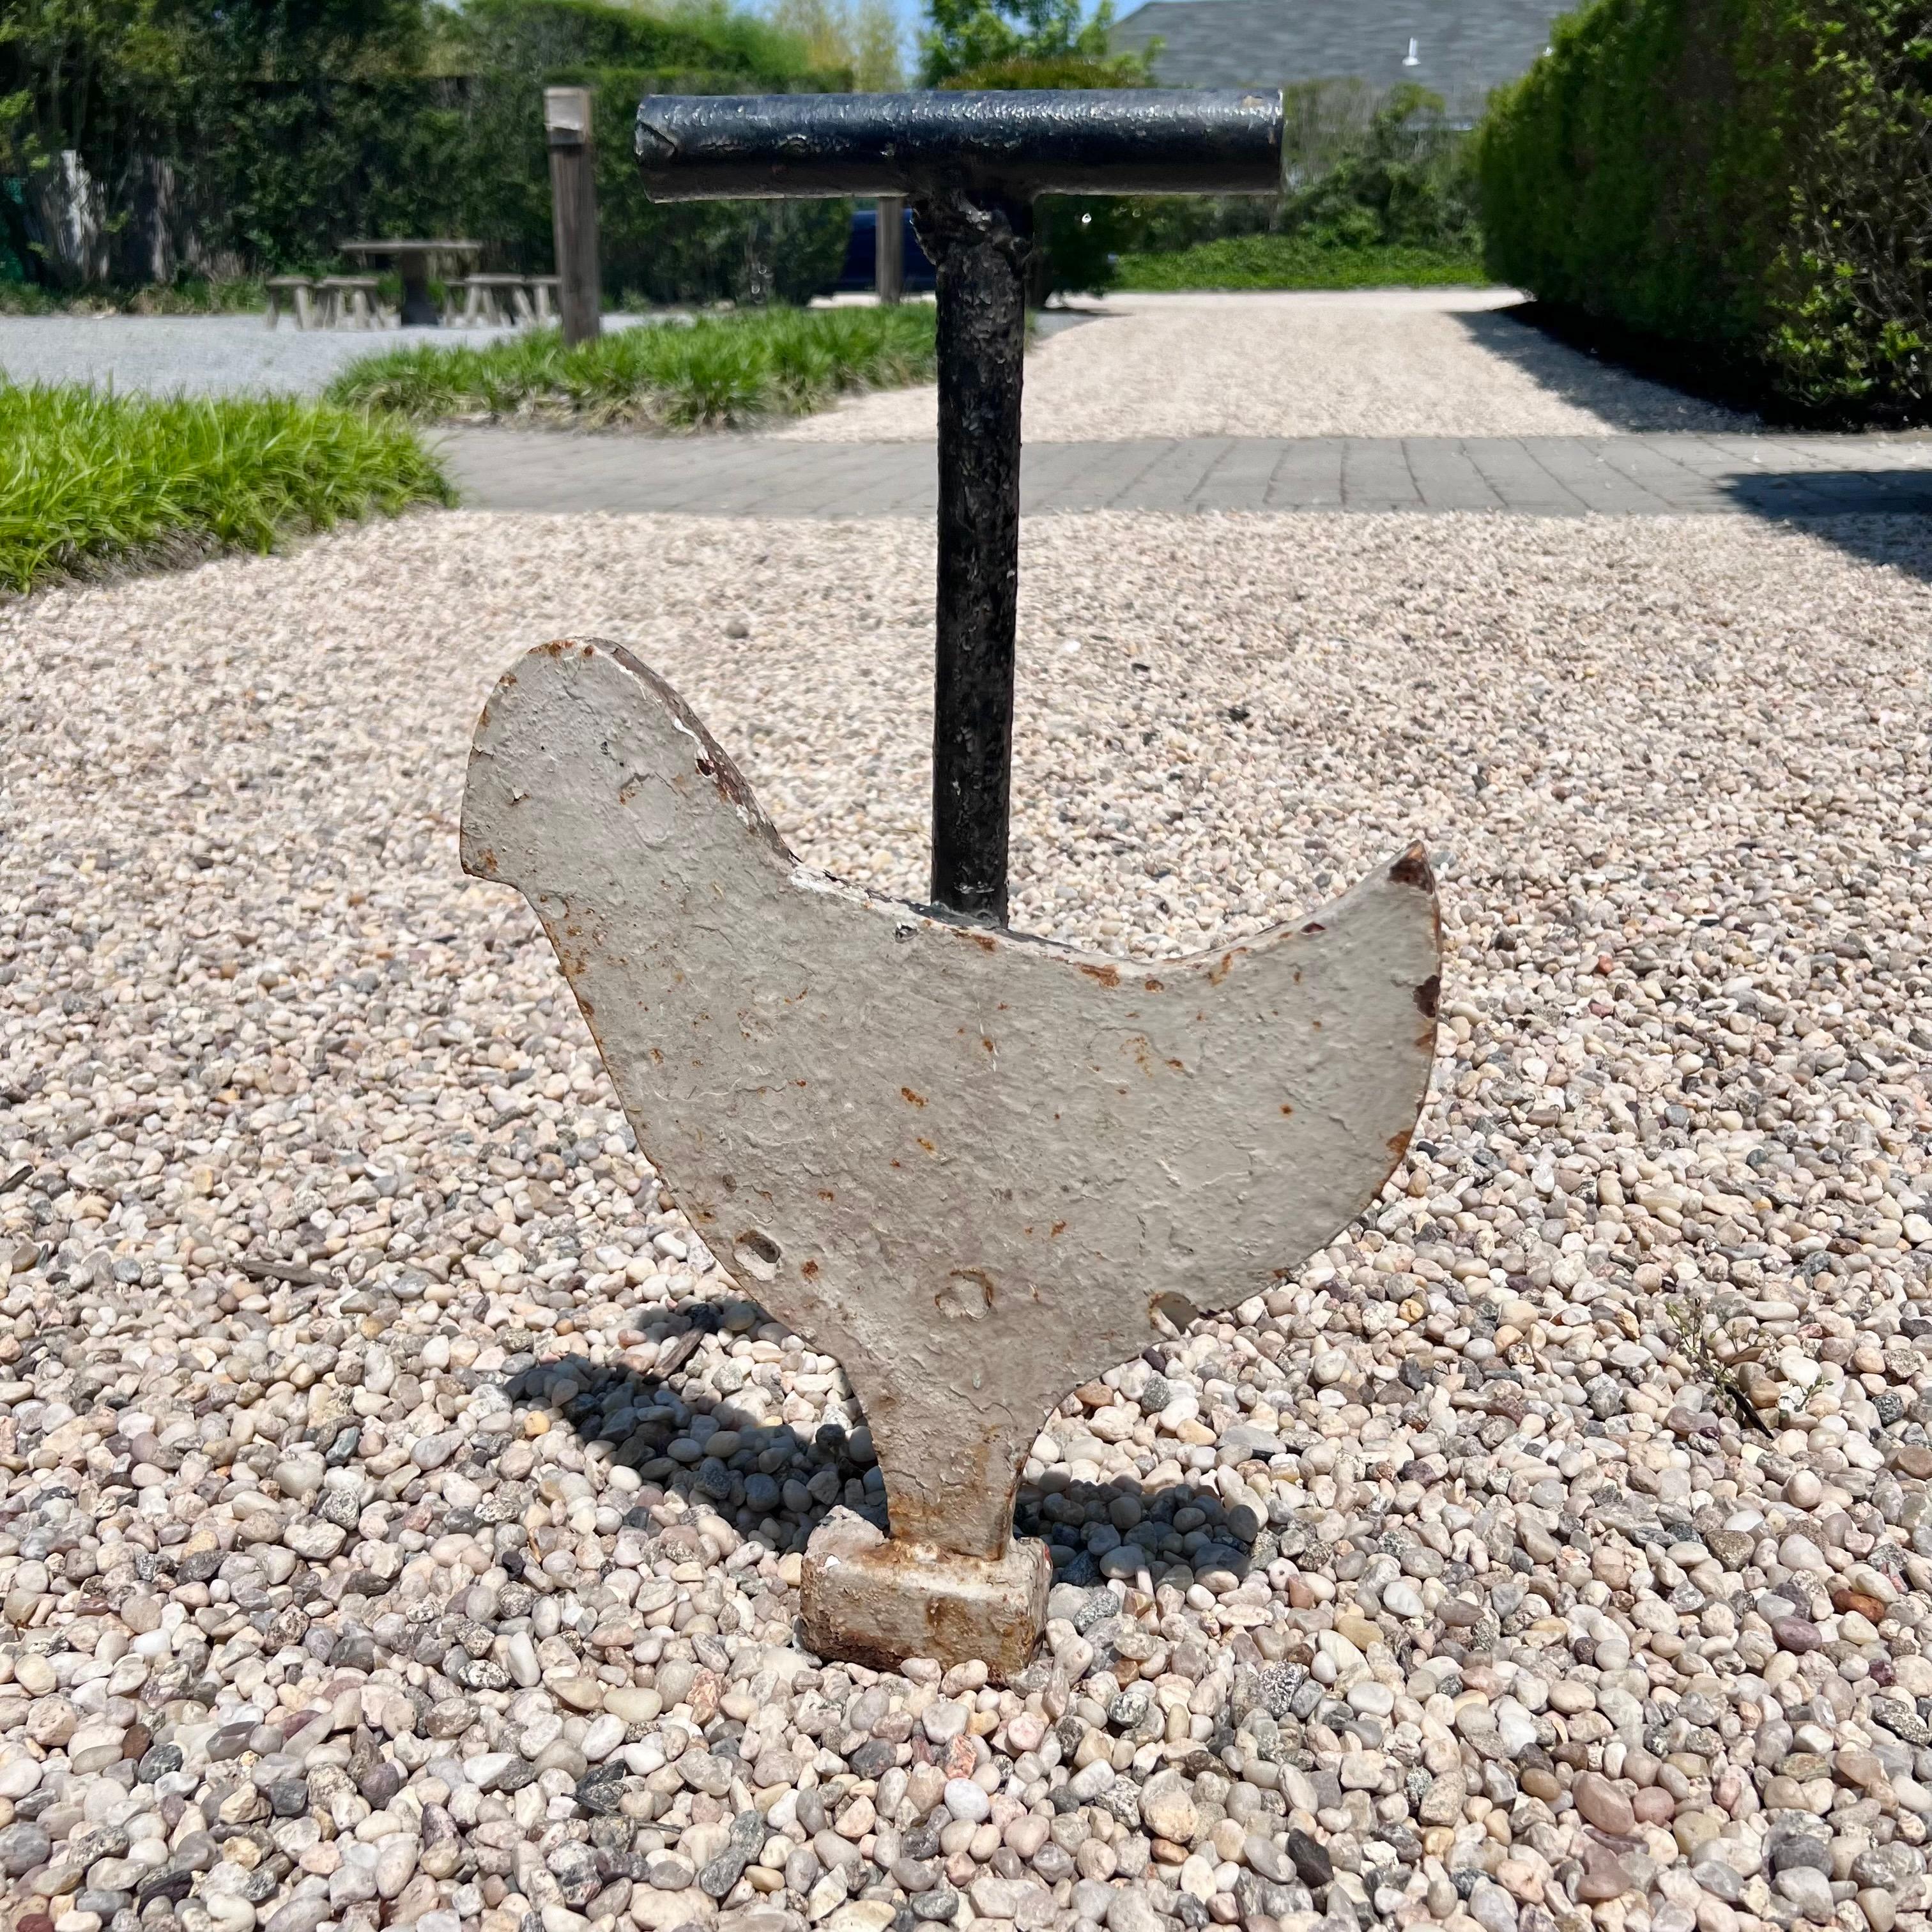 Very interesting heavy metal shooting target. Figure of a large chicken is attached to a metal post with a hollow tube at the top which a cable would run through suspending this target in the air. Figure is on a hinge so when you hit the target, the